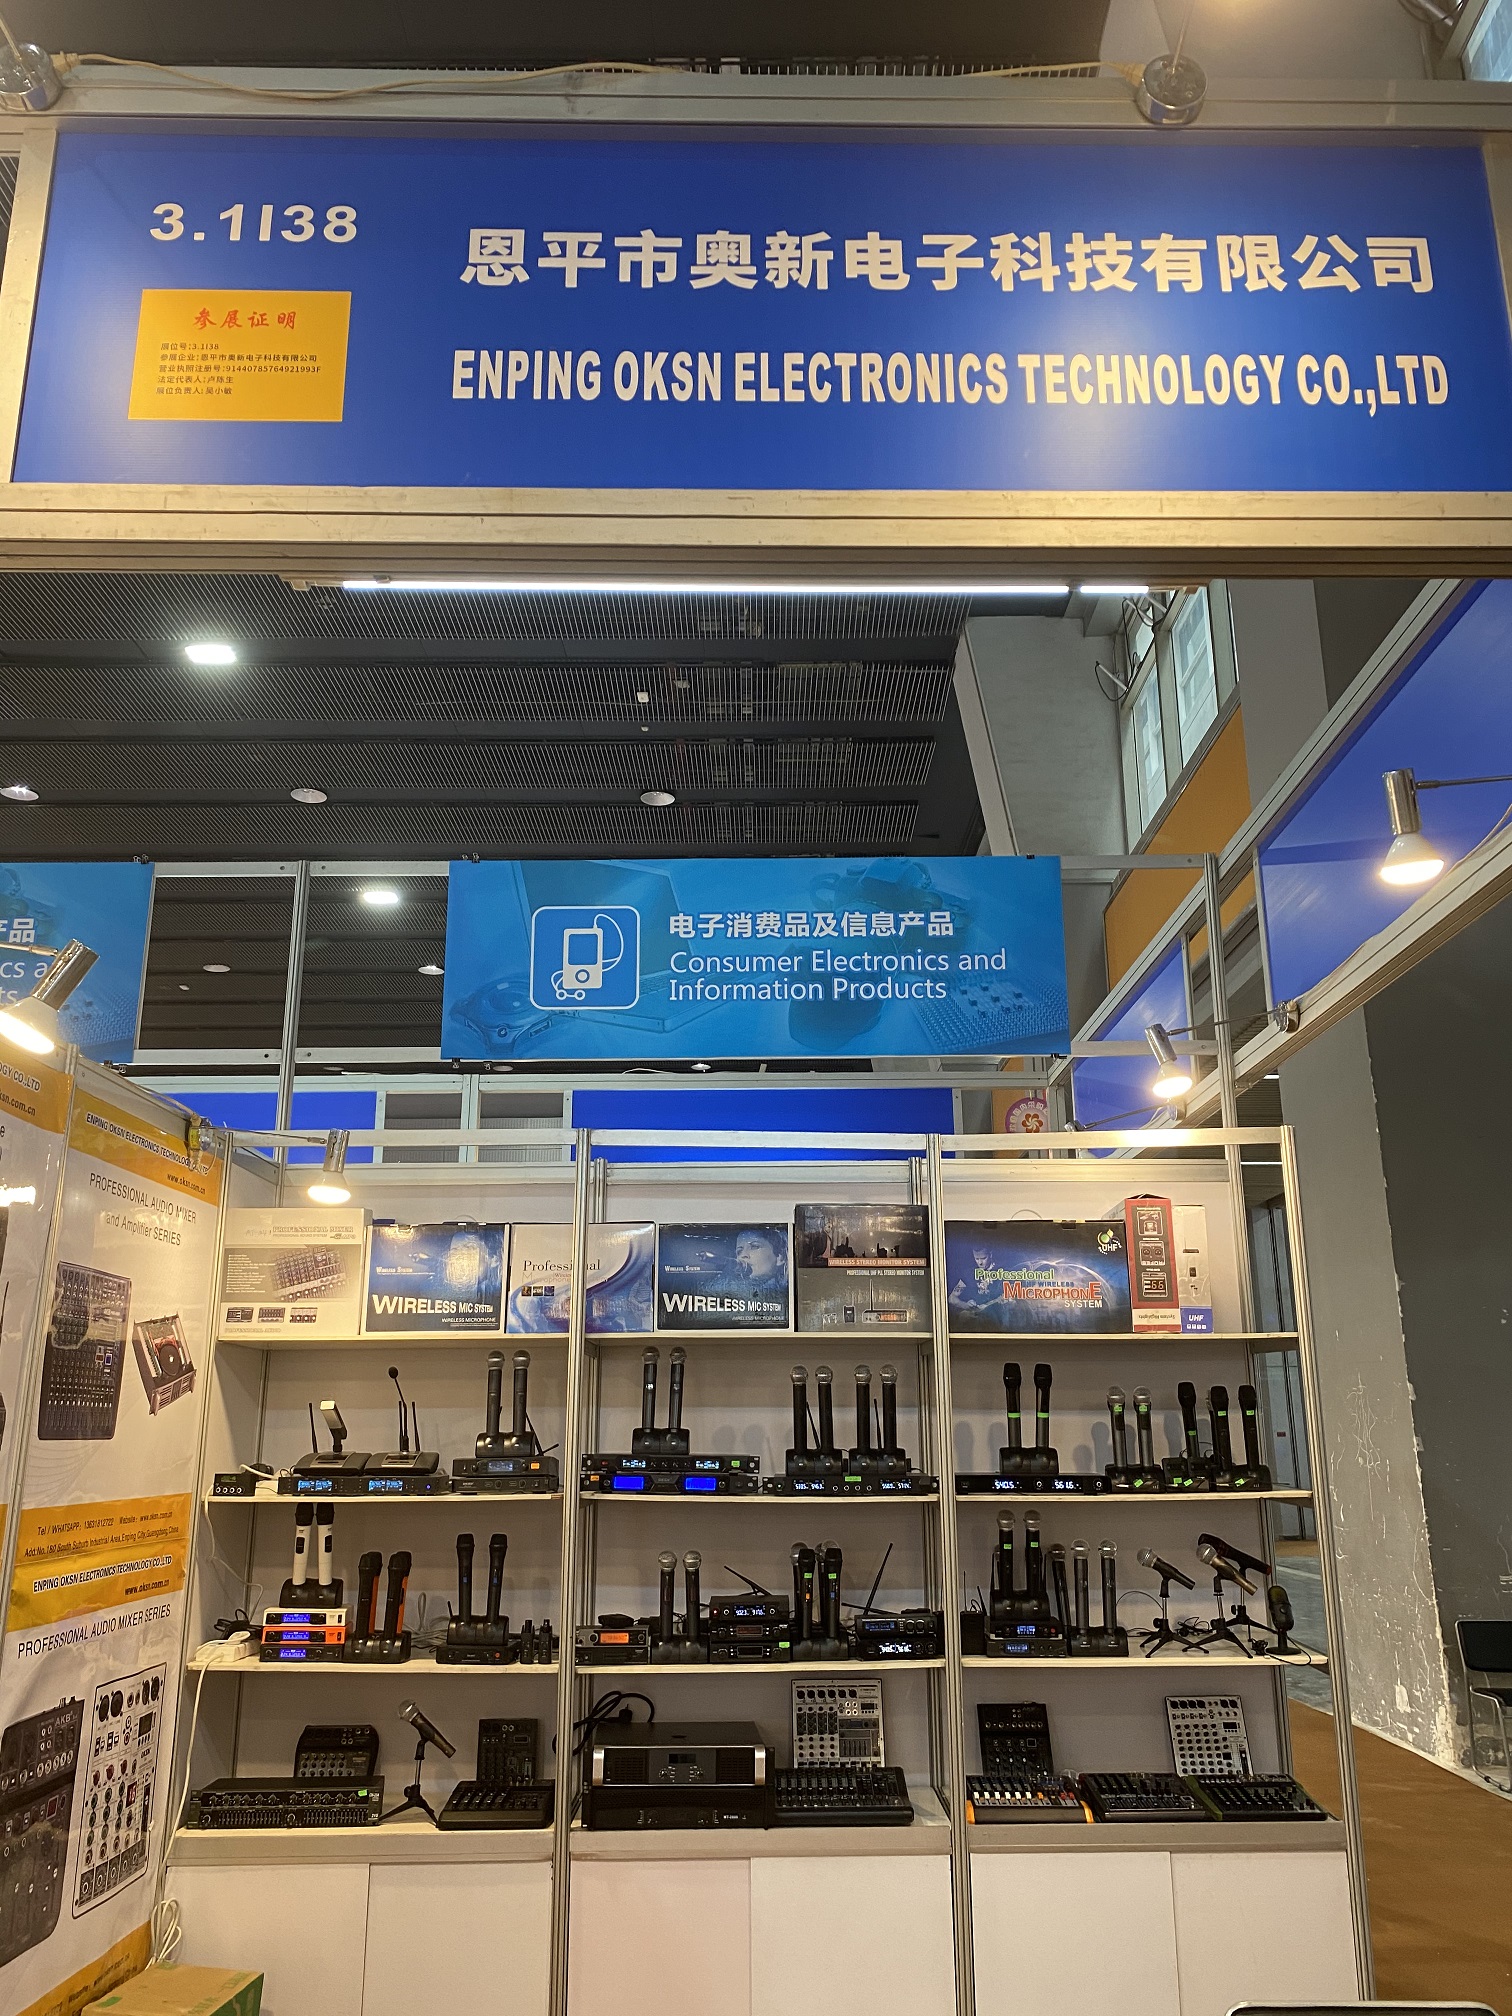 OKSN Electronics Technology Co., Ltd: A Leading Manufacturer of Microphones at the 2023 Canton Fair